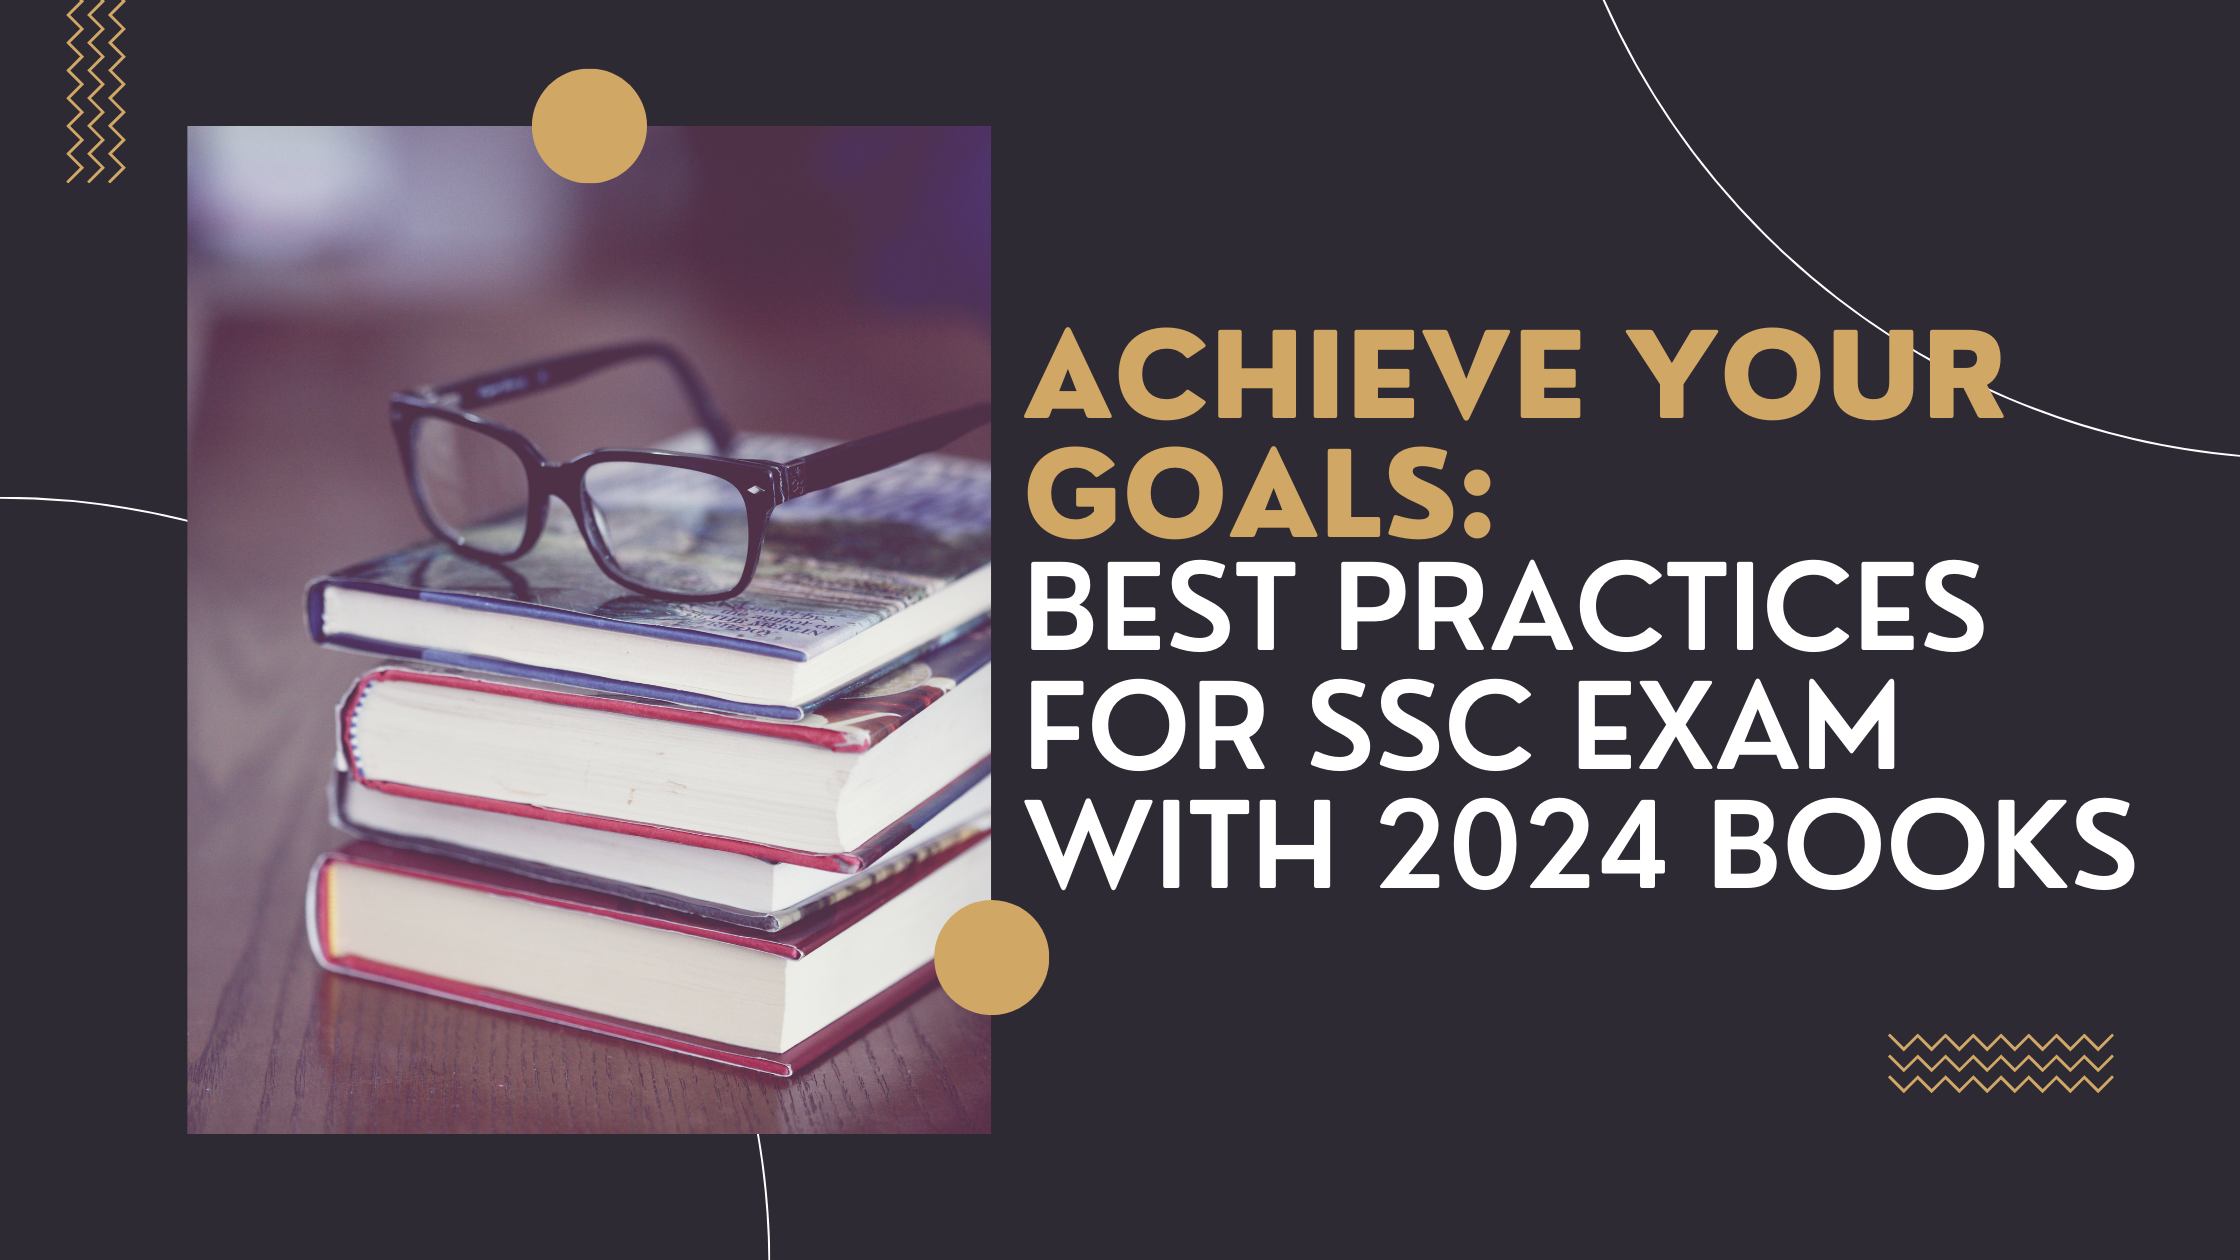 Achieve Your Goals: Best Practices for SSC Exam with 2024 Books